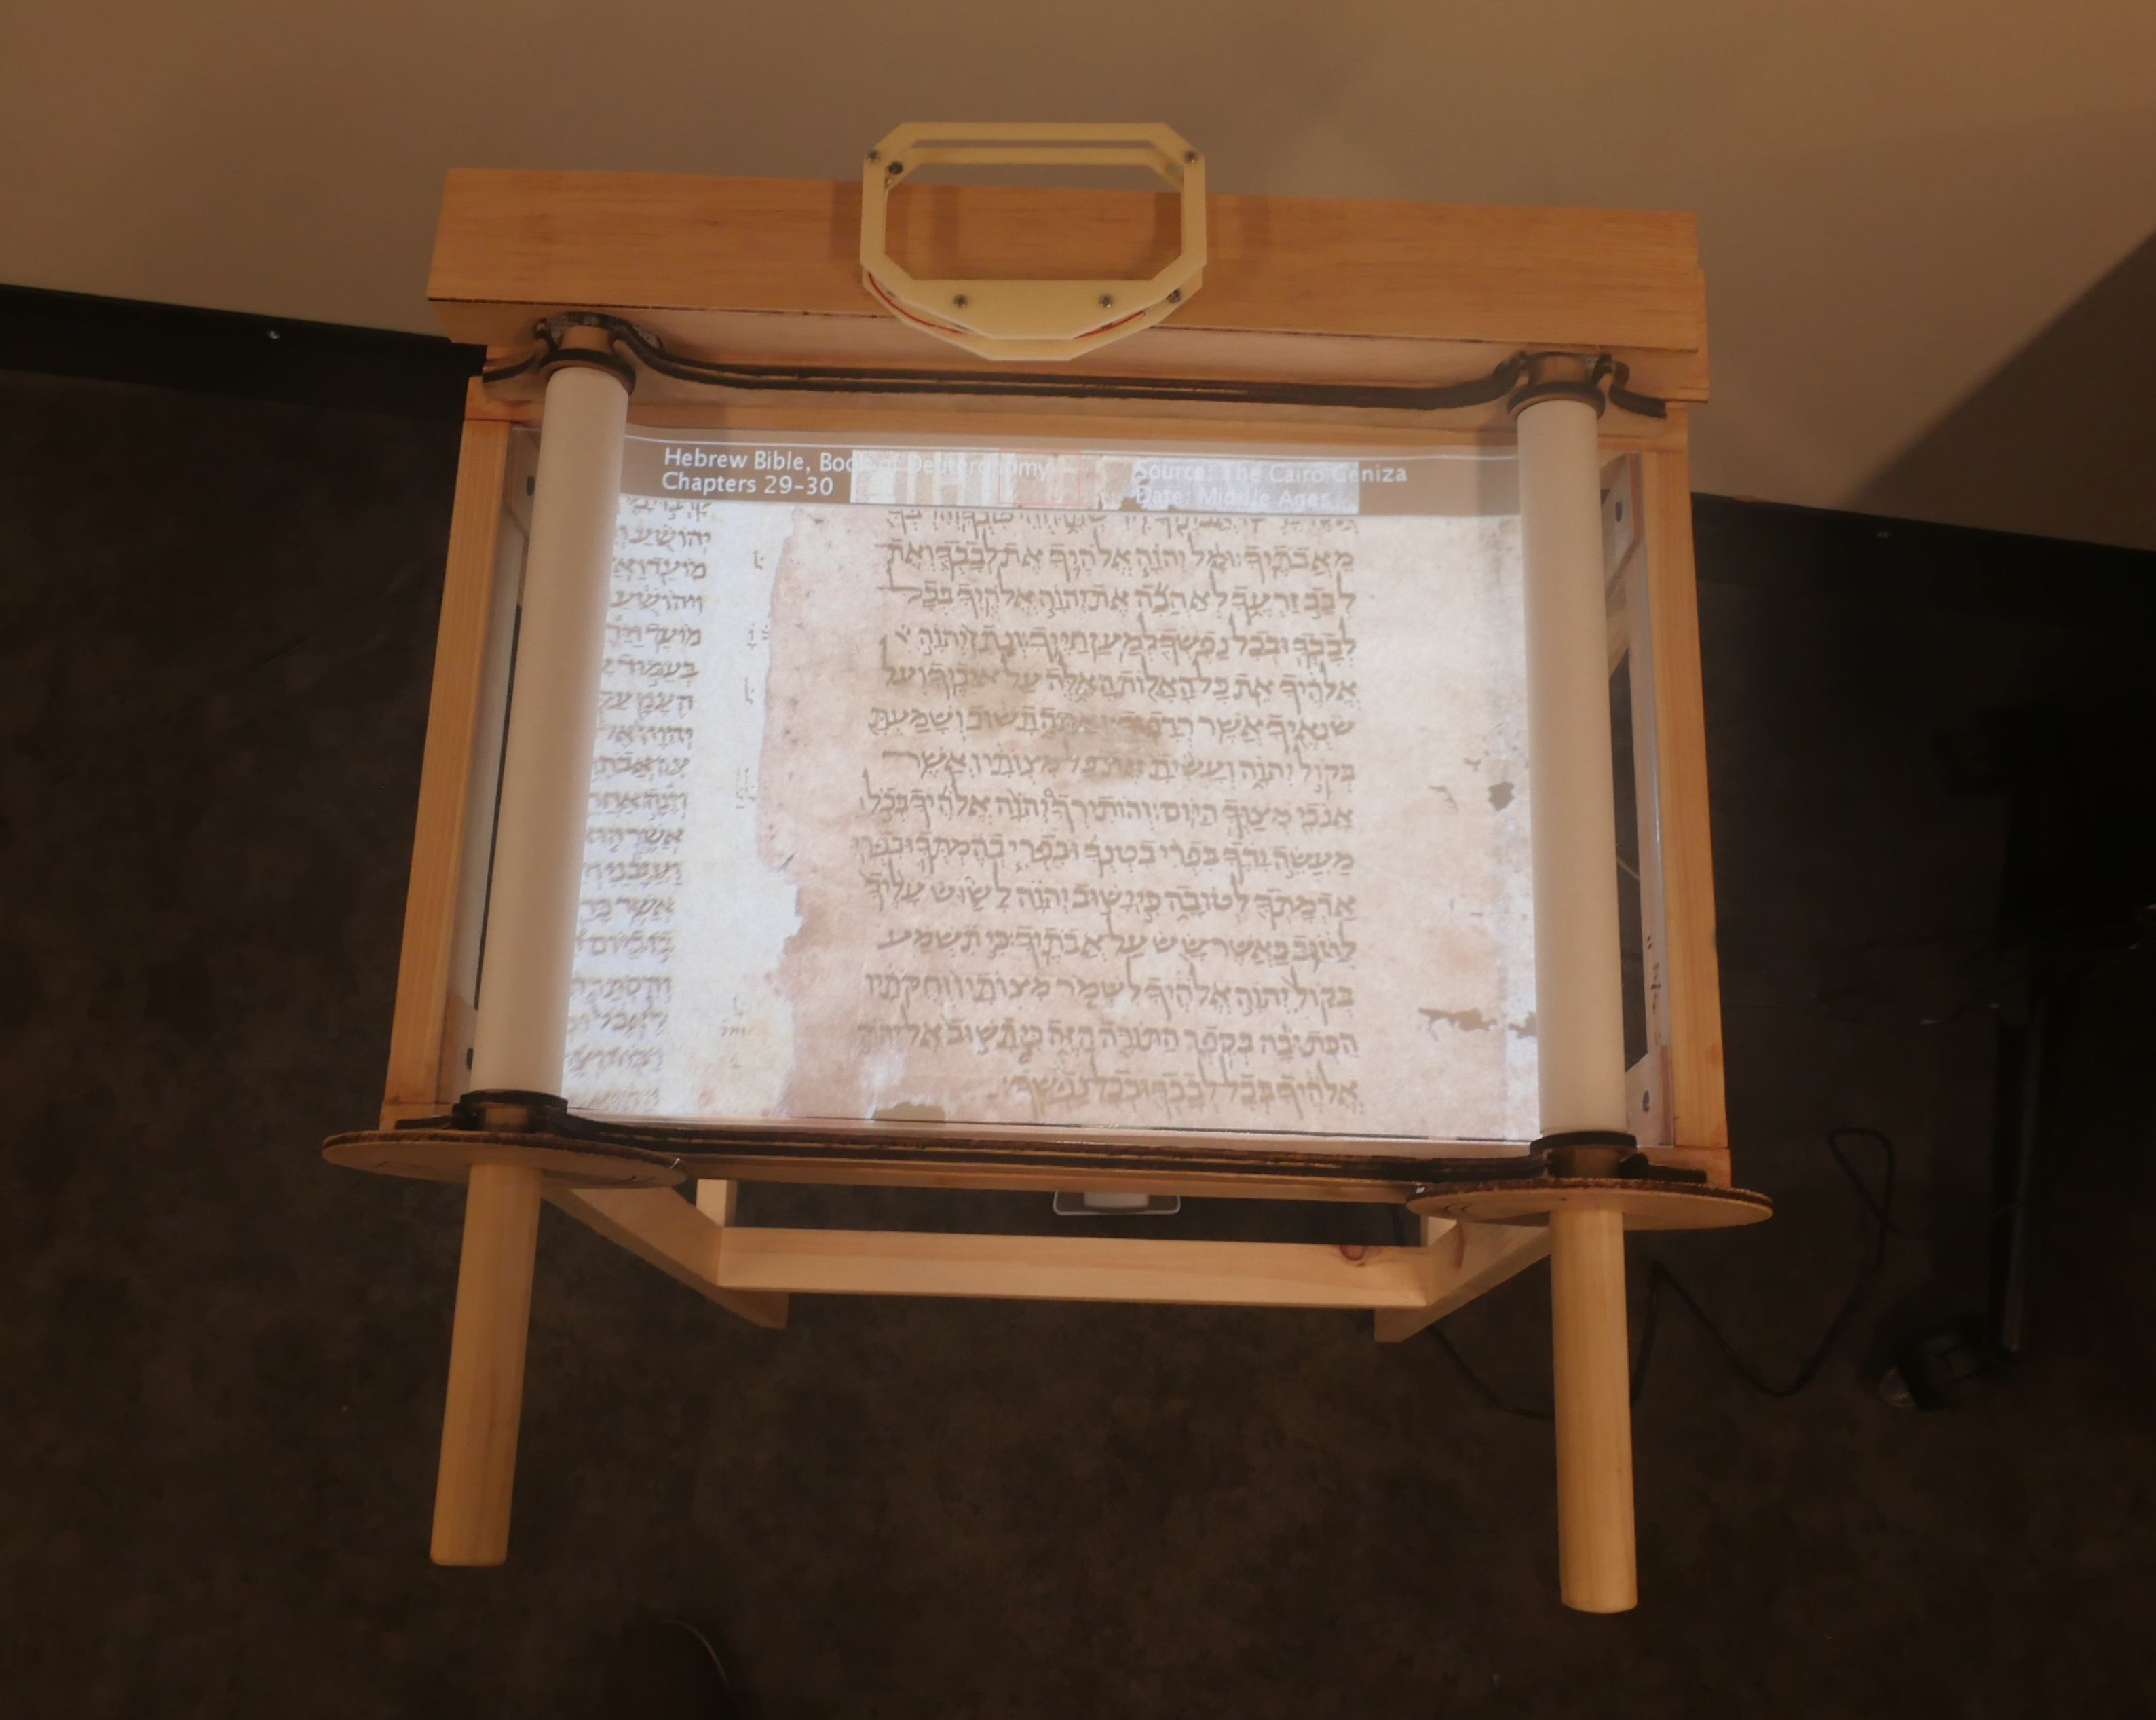 an interactive installation that allows the user to physically interact with a projected version of an ancient scroll